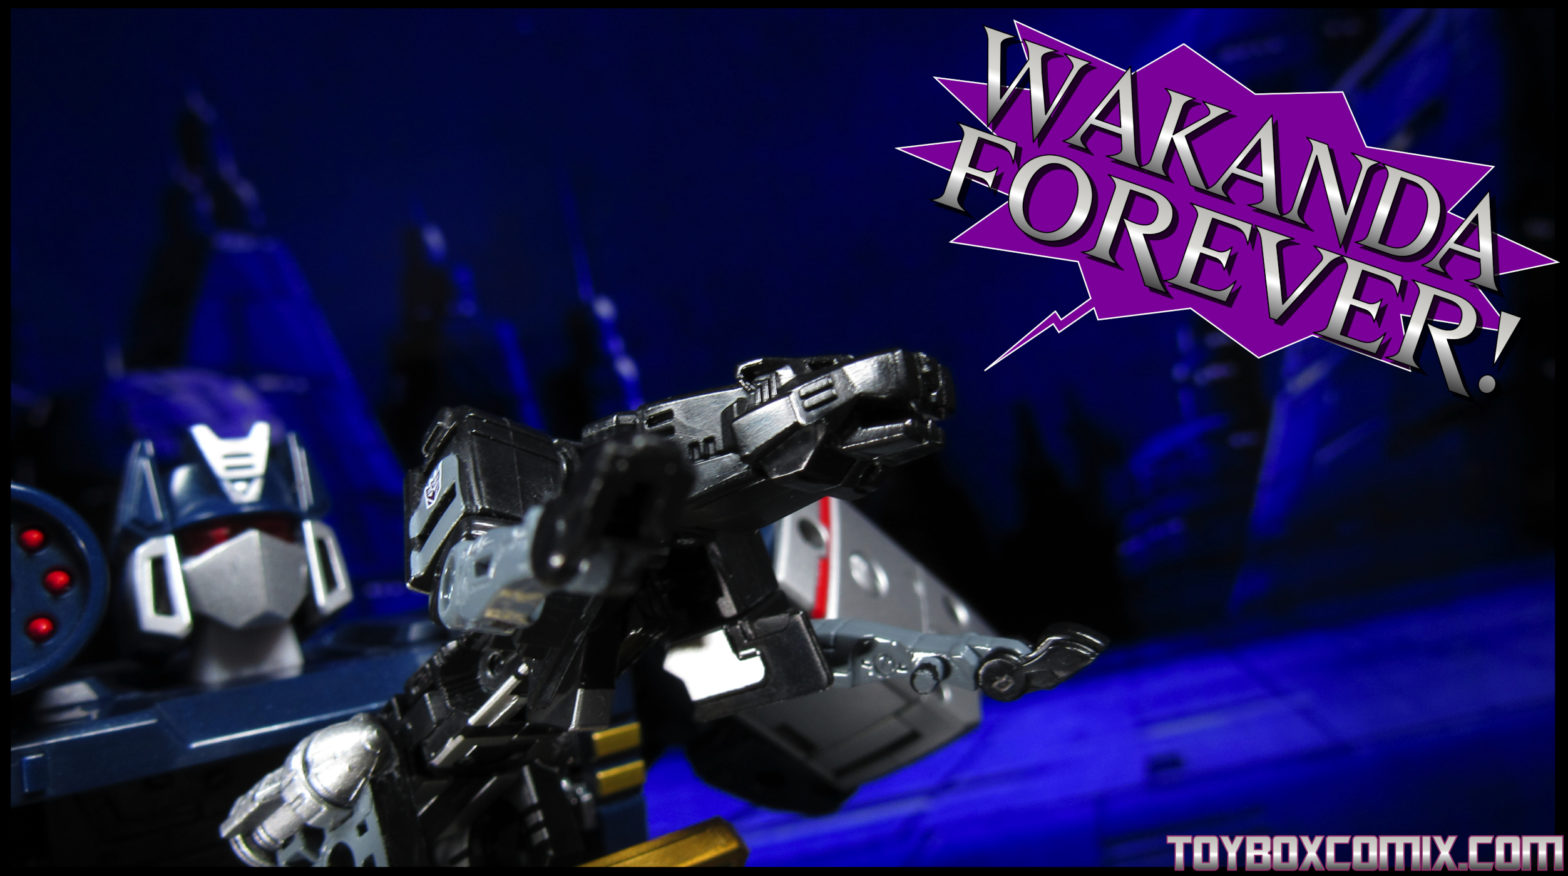 Ravage leaps out of Soundwave's chest, yelling "Wakanda Forever!"